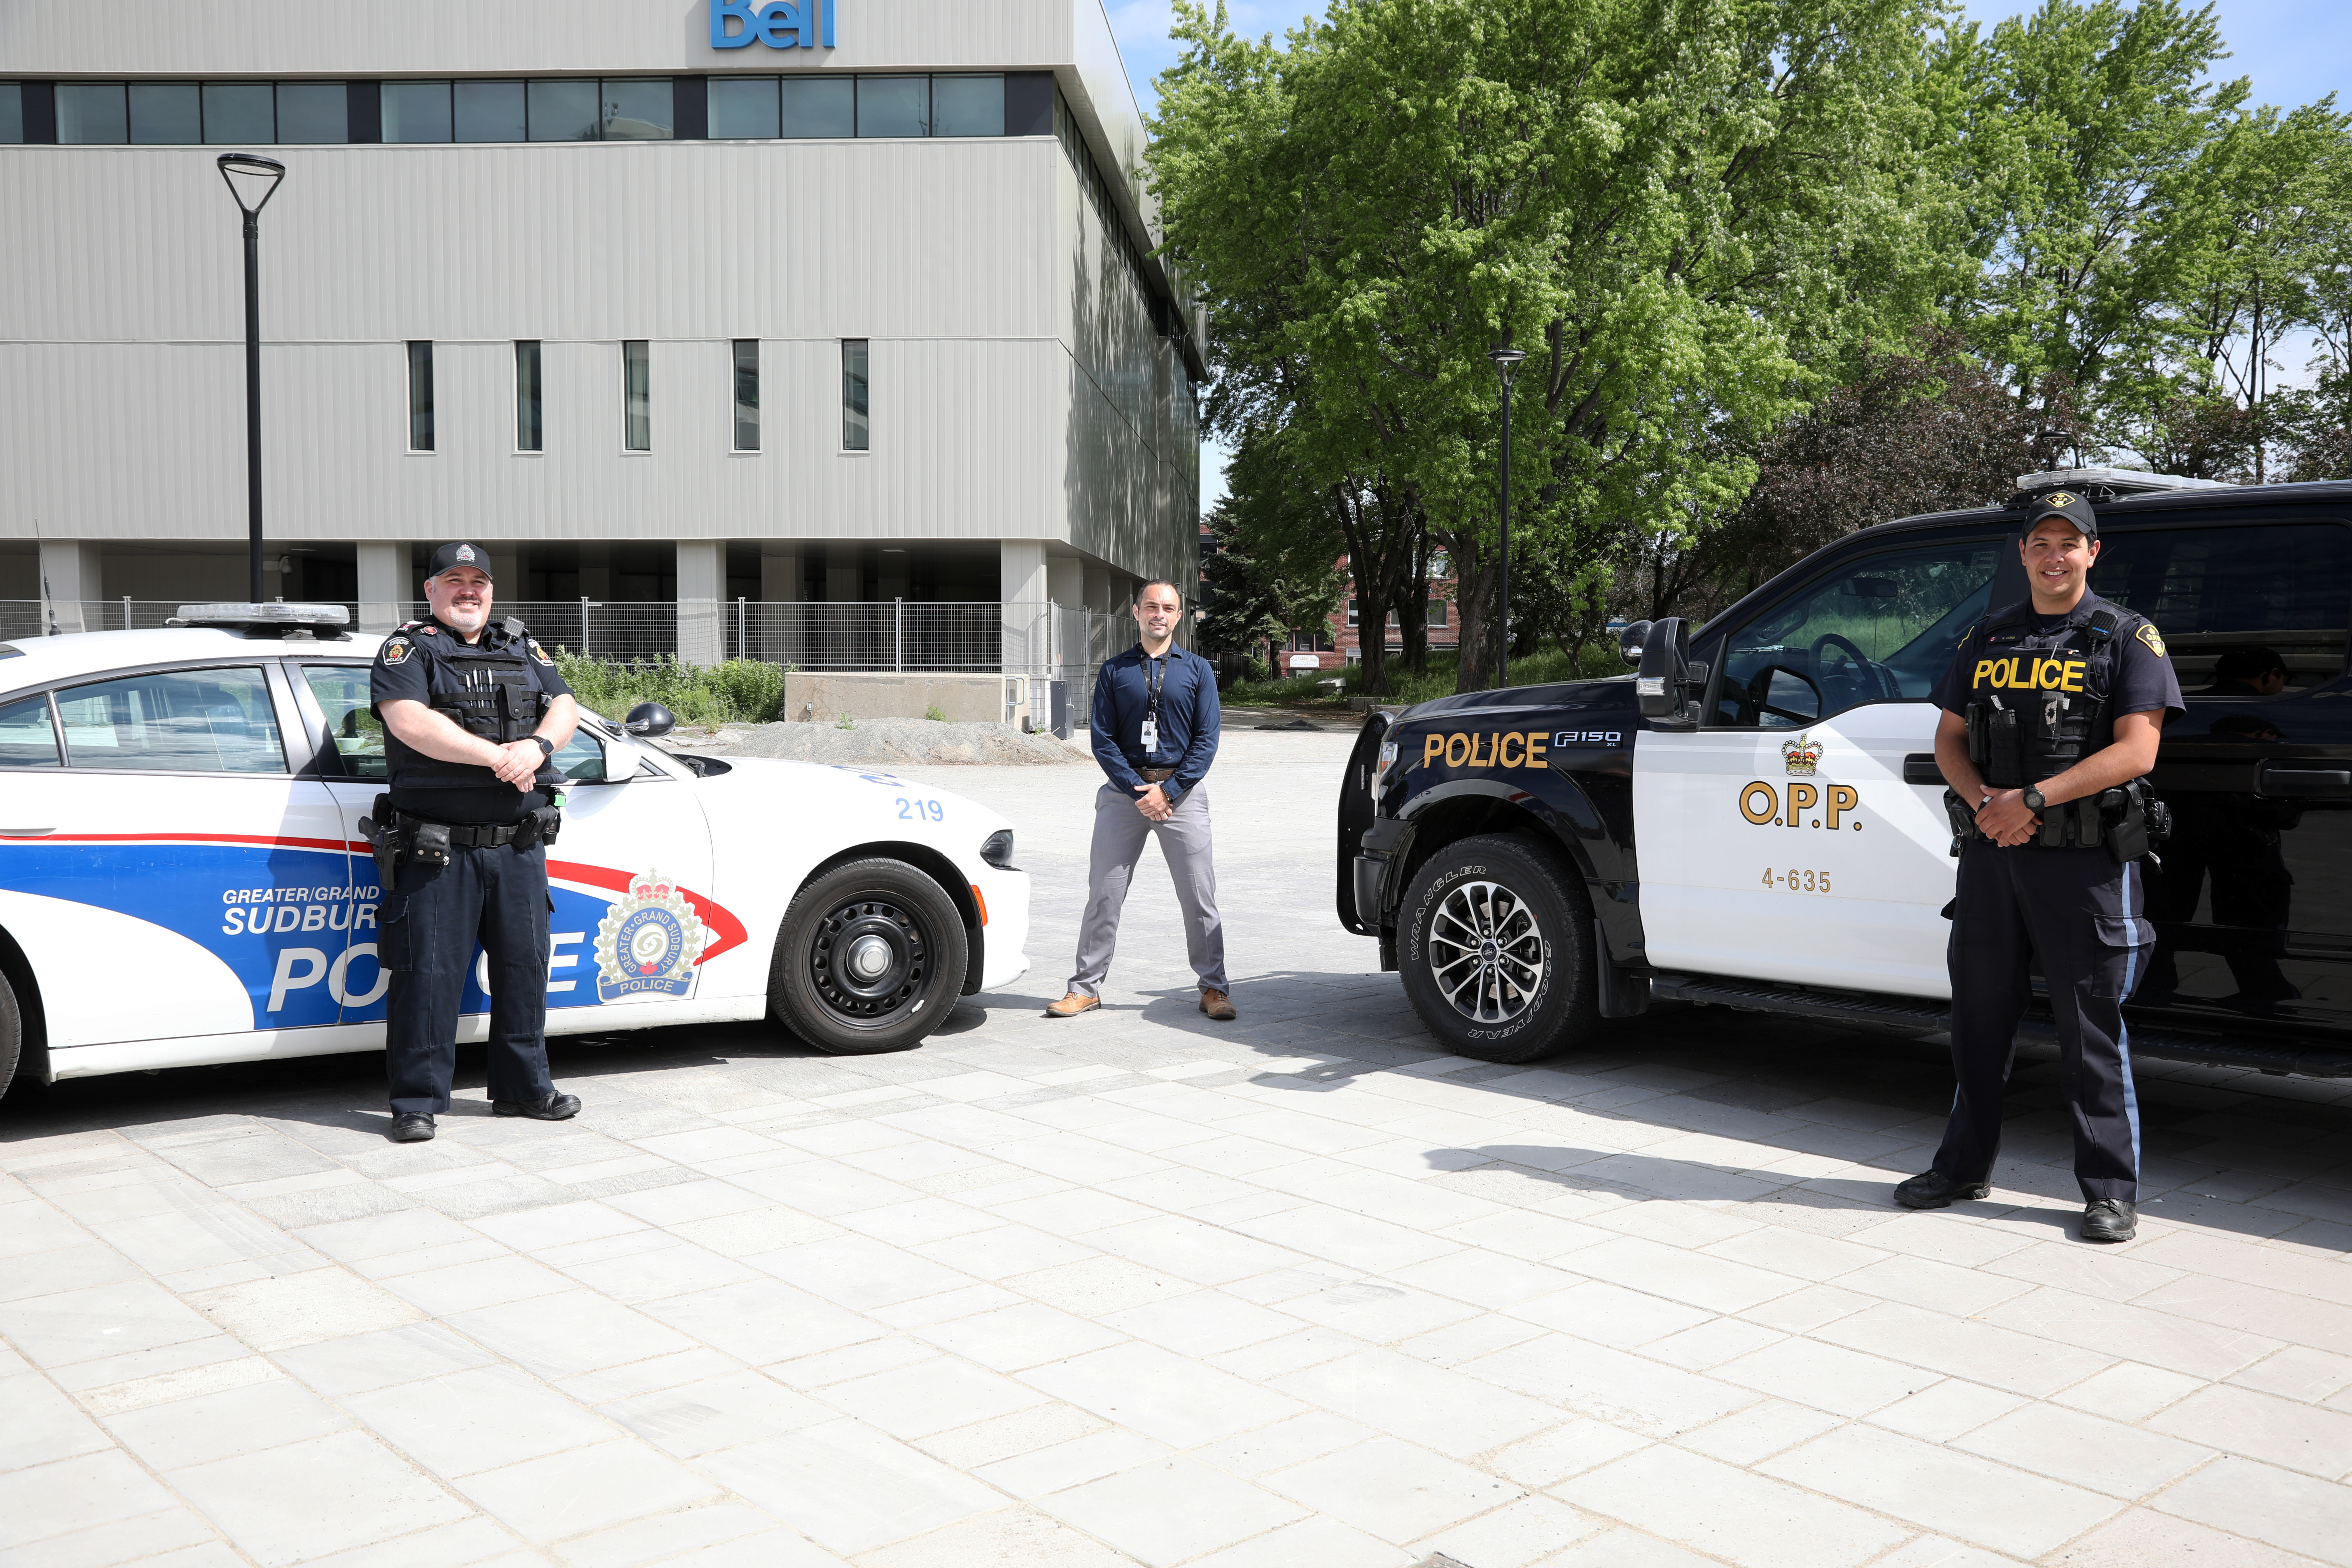 Two police officers and health representative standing between police cruisers